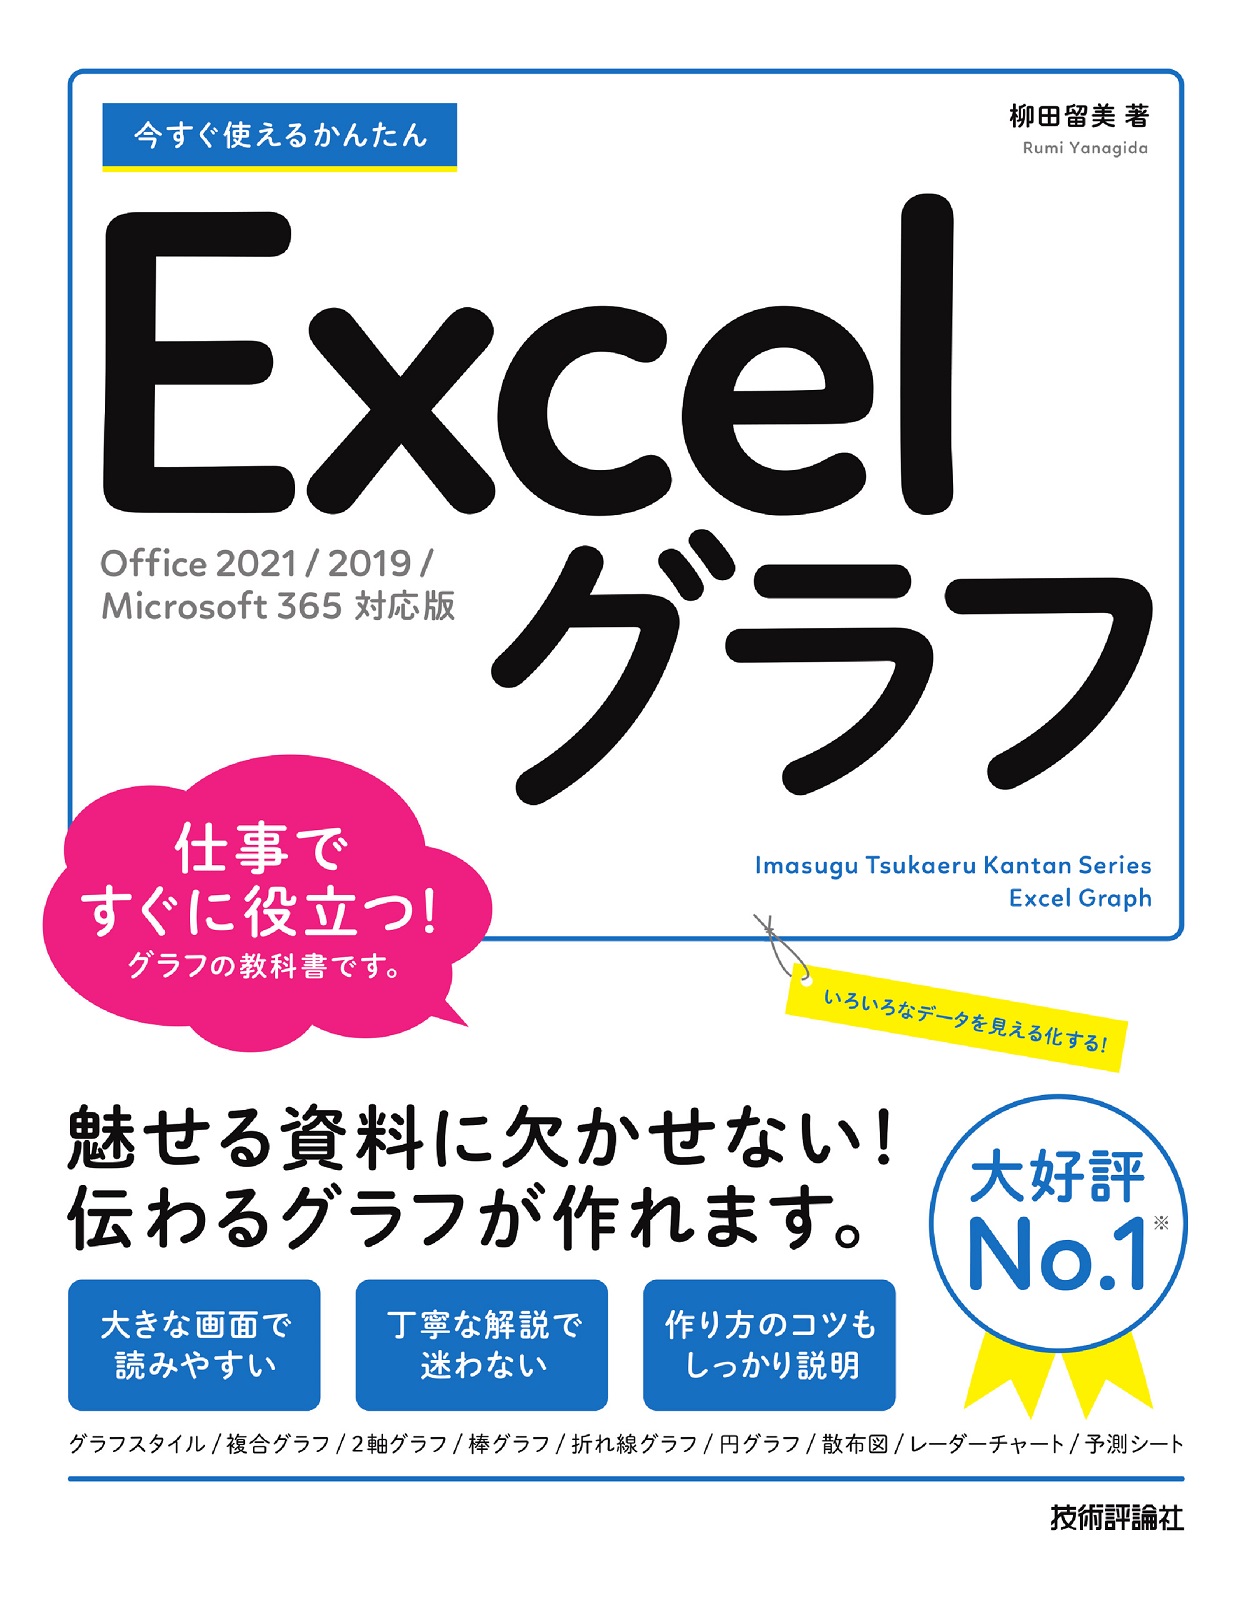 2021/2019/Microsoft　365対応版］：書籍案内｜技術評論社　今すぐ使えるかんたん　Excelグラフ［Office